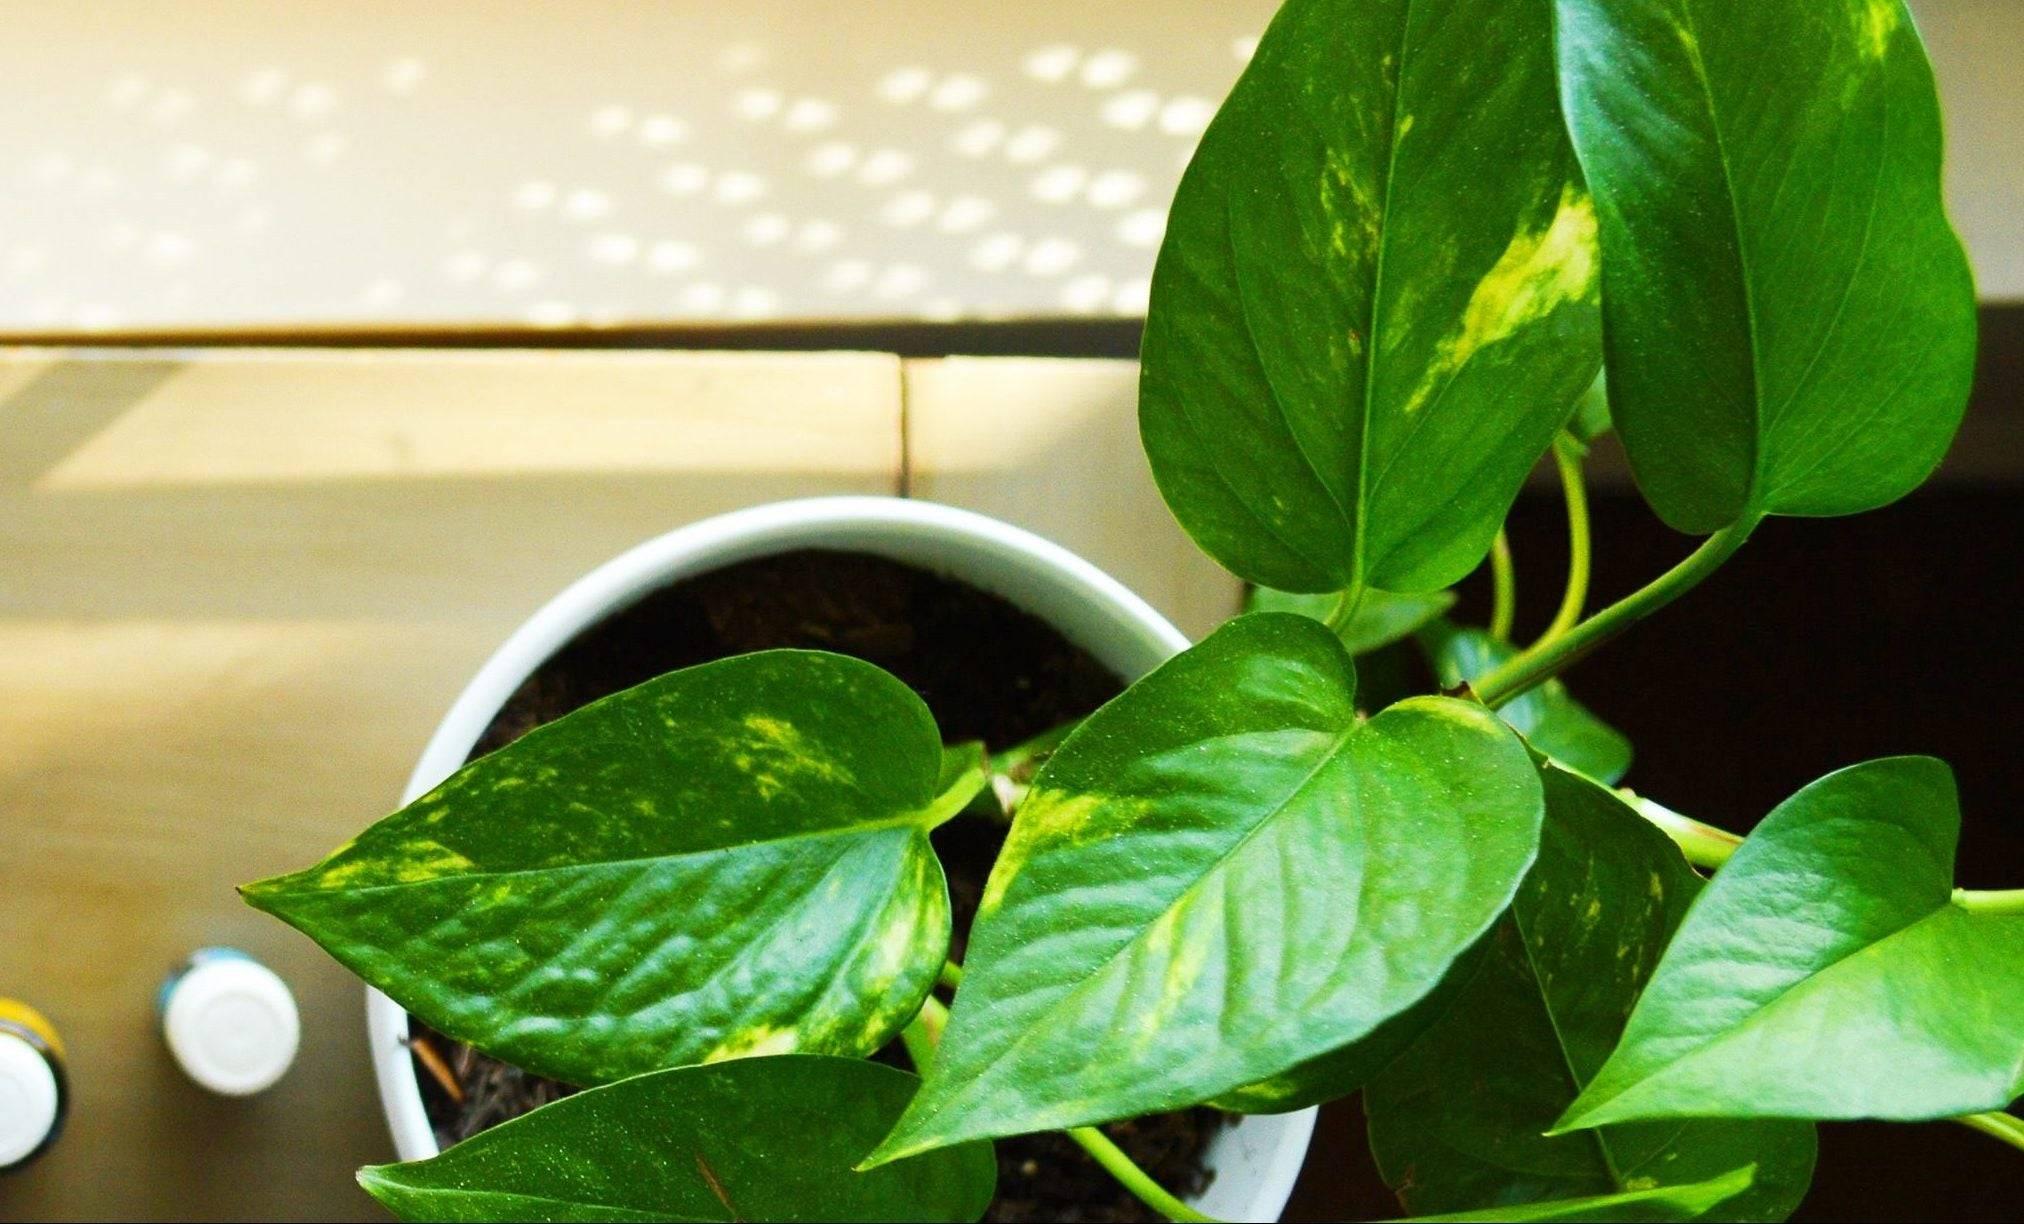 How to Deal with Fungus Gnats on Houseplants